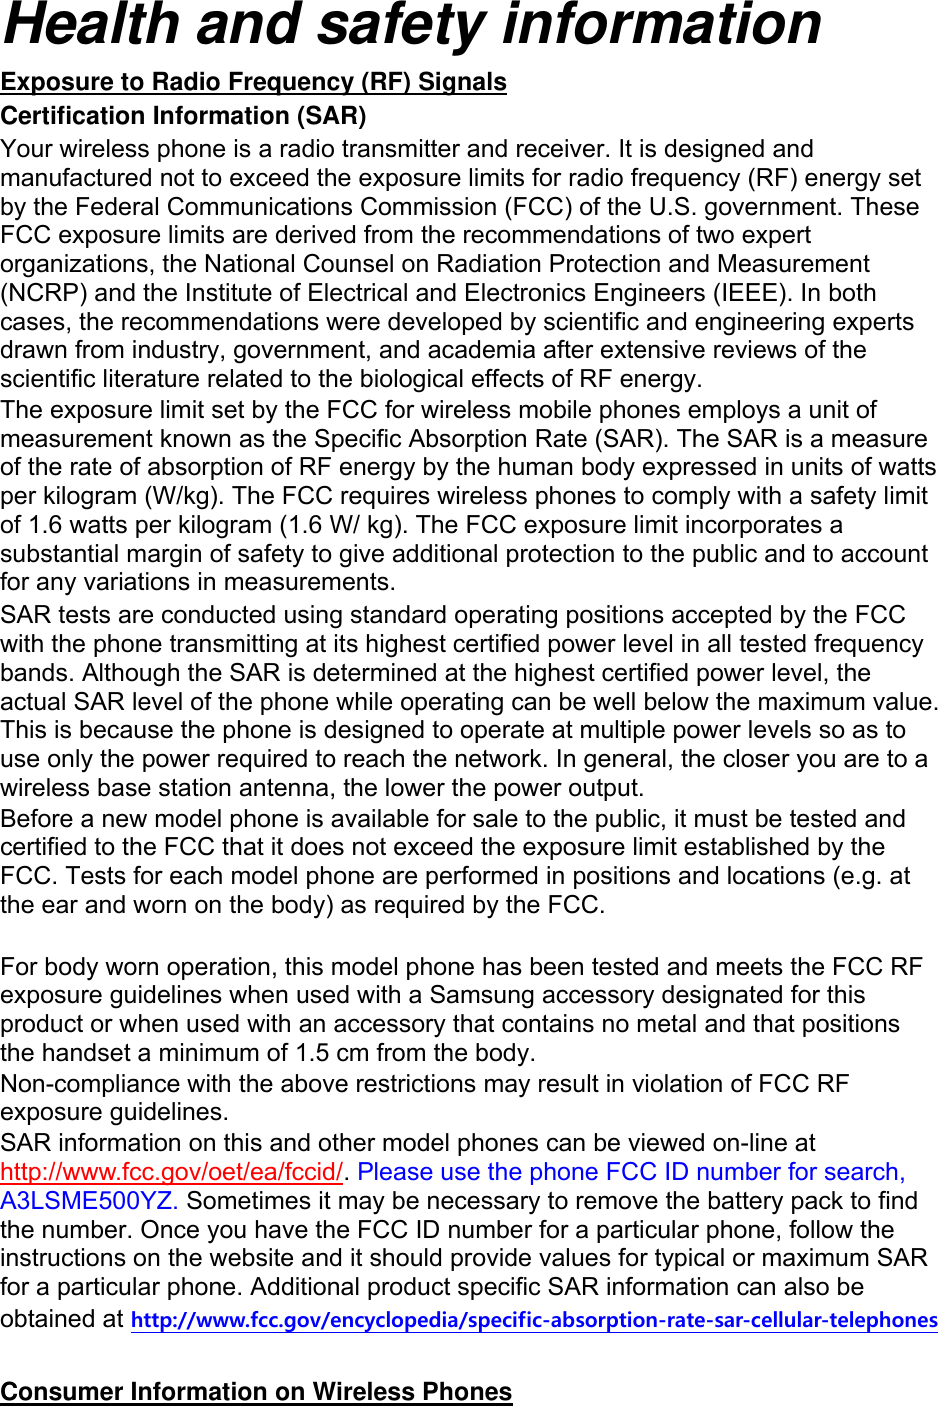 Health and safety information Exposure to Radio Frequency (RF) Signals Certification Information (SAR) Your wireless phone is a radio transmitter and receiver. It is designed and manufactured not to exceed the exposure limits for radio frequency (RF) energy set by the Federal Communications Commission (FCC) of the U.S. government. These FCC exposure limits are derived from the recommendations of two expert organizations, the National Counsel on Radiation Protection and Measurement (NCRP) and the Institute of Electrical and Electronics Engineers (IEEE). In both cases, the recommendations were developed by scientific and engineering experts drawn from industry, government, and academia after extensive reviews of the scientific literature related to the biological effects of RF energy. The exposure limit set by the FCC for wireless mobile phones employs a unit of measurement known as the Specific Absorption Rate (SAR). The SAR is a measure of the rate of absorption of RF energy by the human body expressed in units of watts per kilogram (W/kg). The FCC requires wireless phones to comply with a safety limit of 1.6 watts per kilogram (1.6 W/ kg). The FCC exposure limit incorporates a substantial margin of safety to give additional protection to the public and to account for any variations in measurements. SAR tests are conducted using standard operating positions accepted by the FCC with the phone transmitting at its highest certified power level in all tested frequency bands. Although the SAR is determined at the highest certified power level, the actual SAR level of the phone while operating can be well below the maximum value. This is because the phone is designed to operate at multiple power levels so as to use only the power required to reach the network. In general, the closer you are to a wireless base station antenna, the lower the power output. Before a new model phone is available for sale to the public, it must be tested and certified to the FCC that it does not exceed the exposure limit established by the FCC. Tests for each model phone are performed in positions and locations (e.g. at the ear and worn on the body) as required by the FCC.      For body worn operation, this model phone has been tested and meets the FCC RF exposure guidelines when used with a Samsung accessory designated for this product or when used with an accessory that contains no metal and that positions the handset a minimum of 1.5 cm from the body.   Non-compliance with the above restrictions may result in violation of FCC RF exposure guidelines. SAR information on this and other model phones can be viewed on-line at http://www.fcc.gov/oet/ea/fccid/. Please use the phone FCC ID number for search, A3LSME500YZ. Sometimes it may be necessary to remove the battery pack to find the number. Once you have the FCC ID number for a particular phone, follow the instructions on the website and it should provide values for typical or maximum SAR for a particular phone. Additional product specific SAR information can also be obtained at http://www.fcc.gov/encyclopedia/specific-absorption-rate-sar-cellular-telephones  Consumer Information on Wireless Phones 